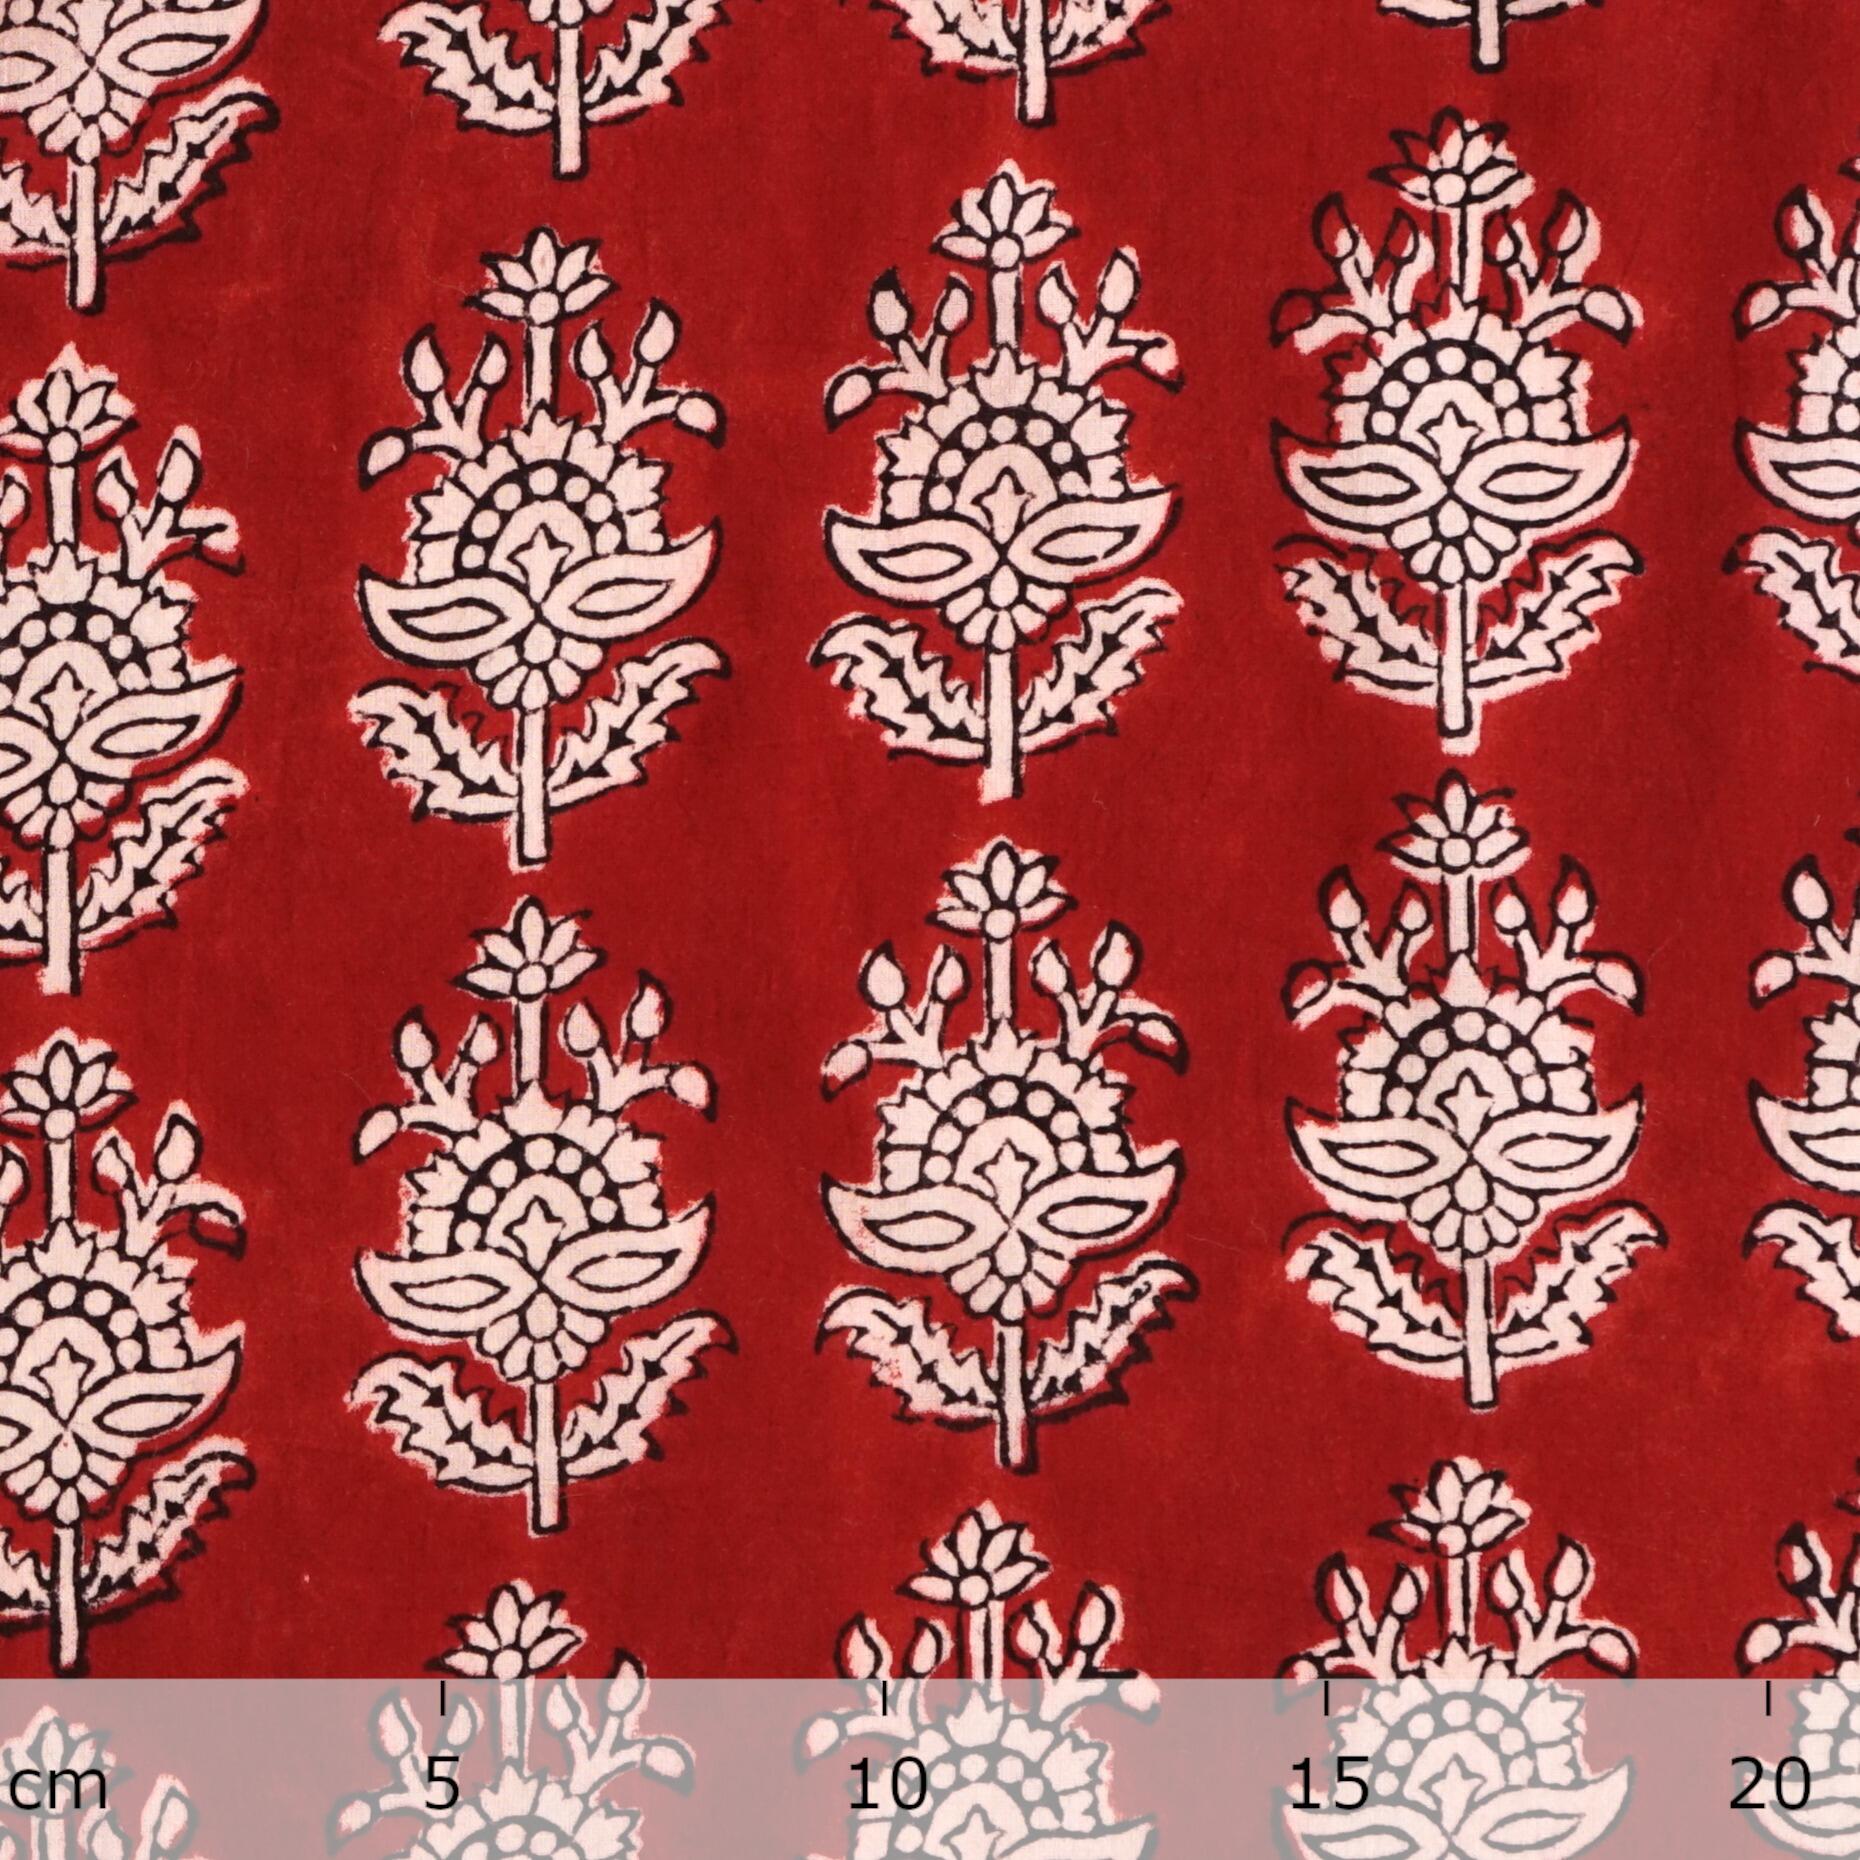 100% Block-Printed Cotton Fabric From India - Talkin' About Design - Iron Rust Black & Alizarin Red Dyes - Ruler